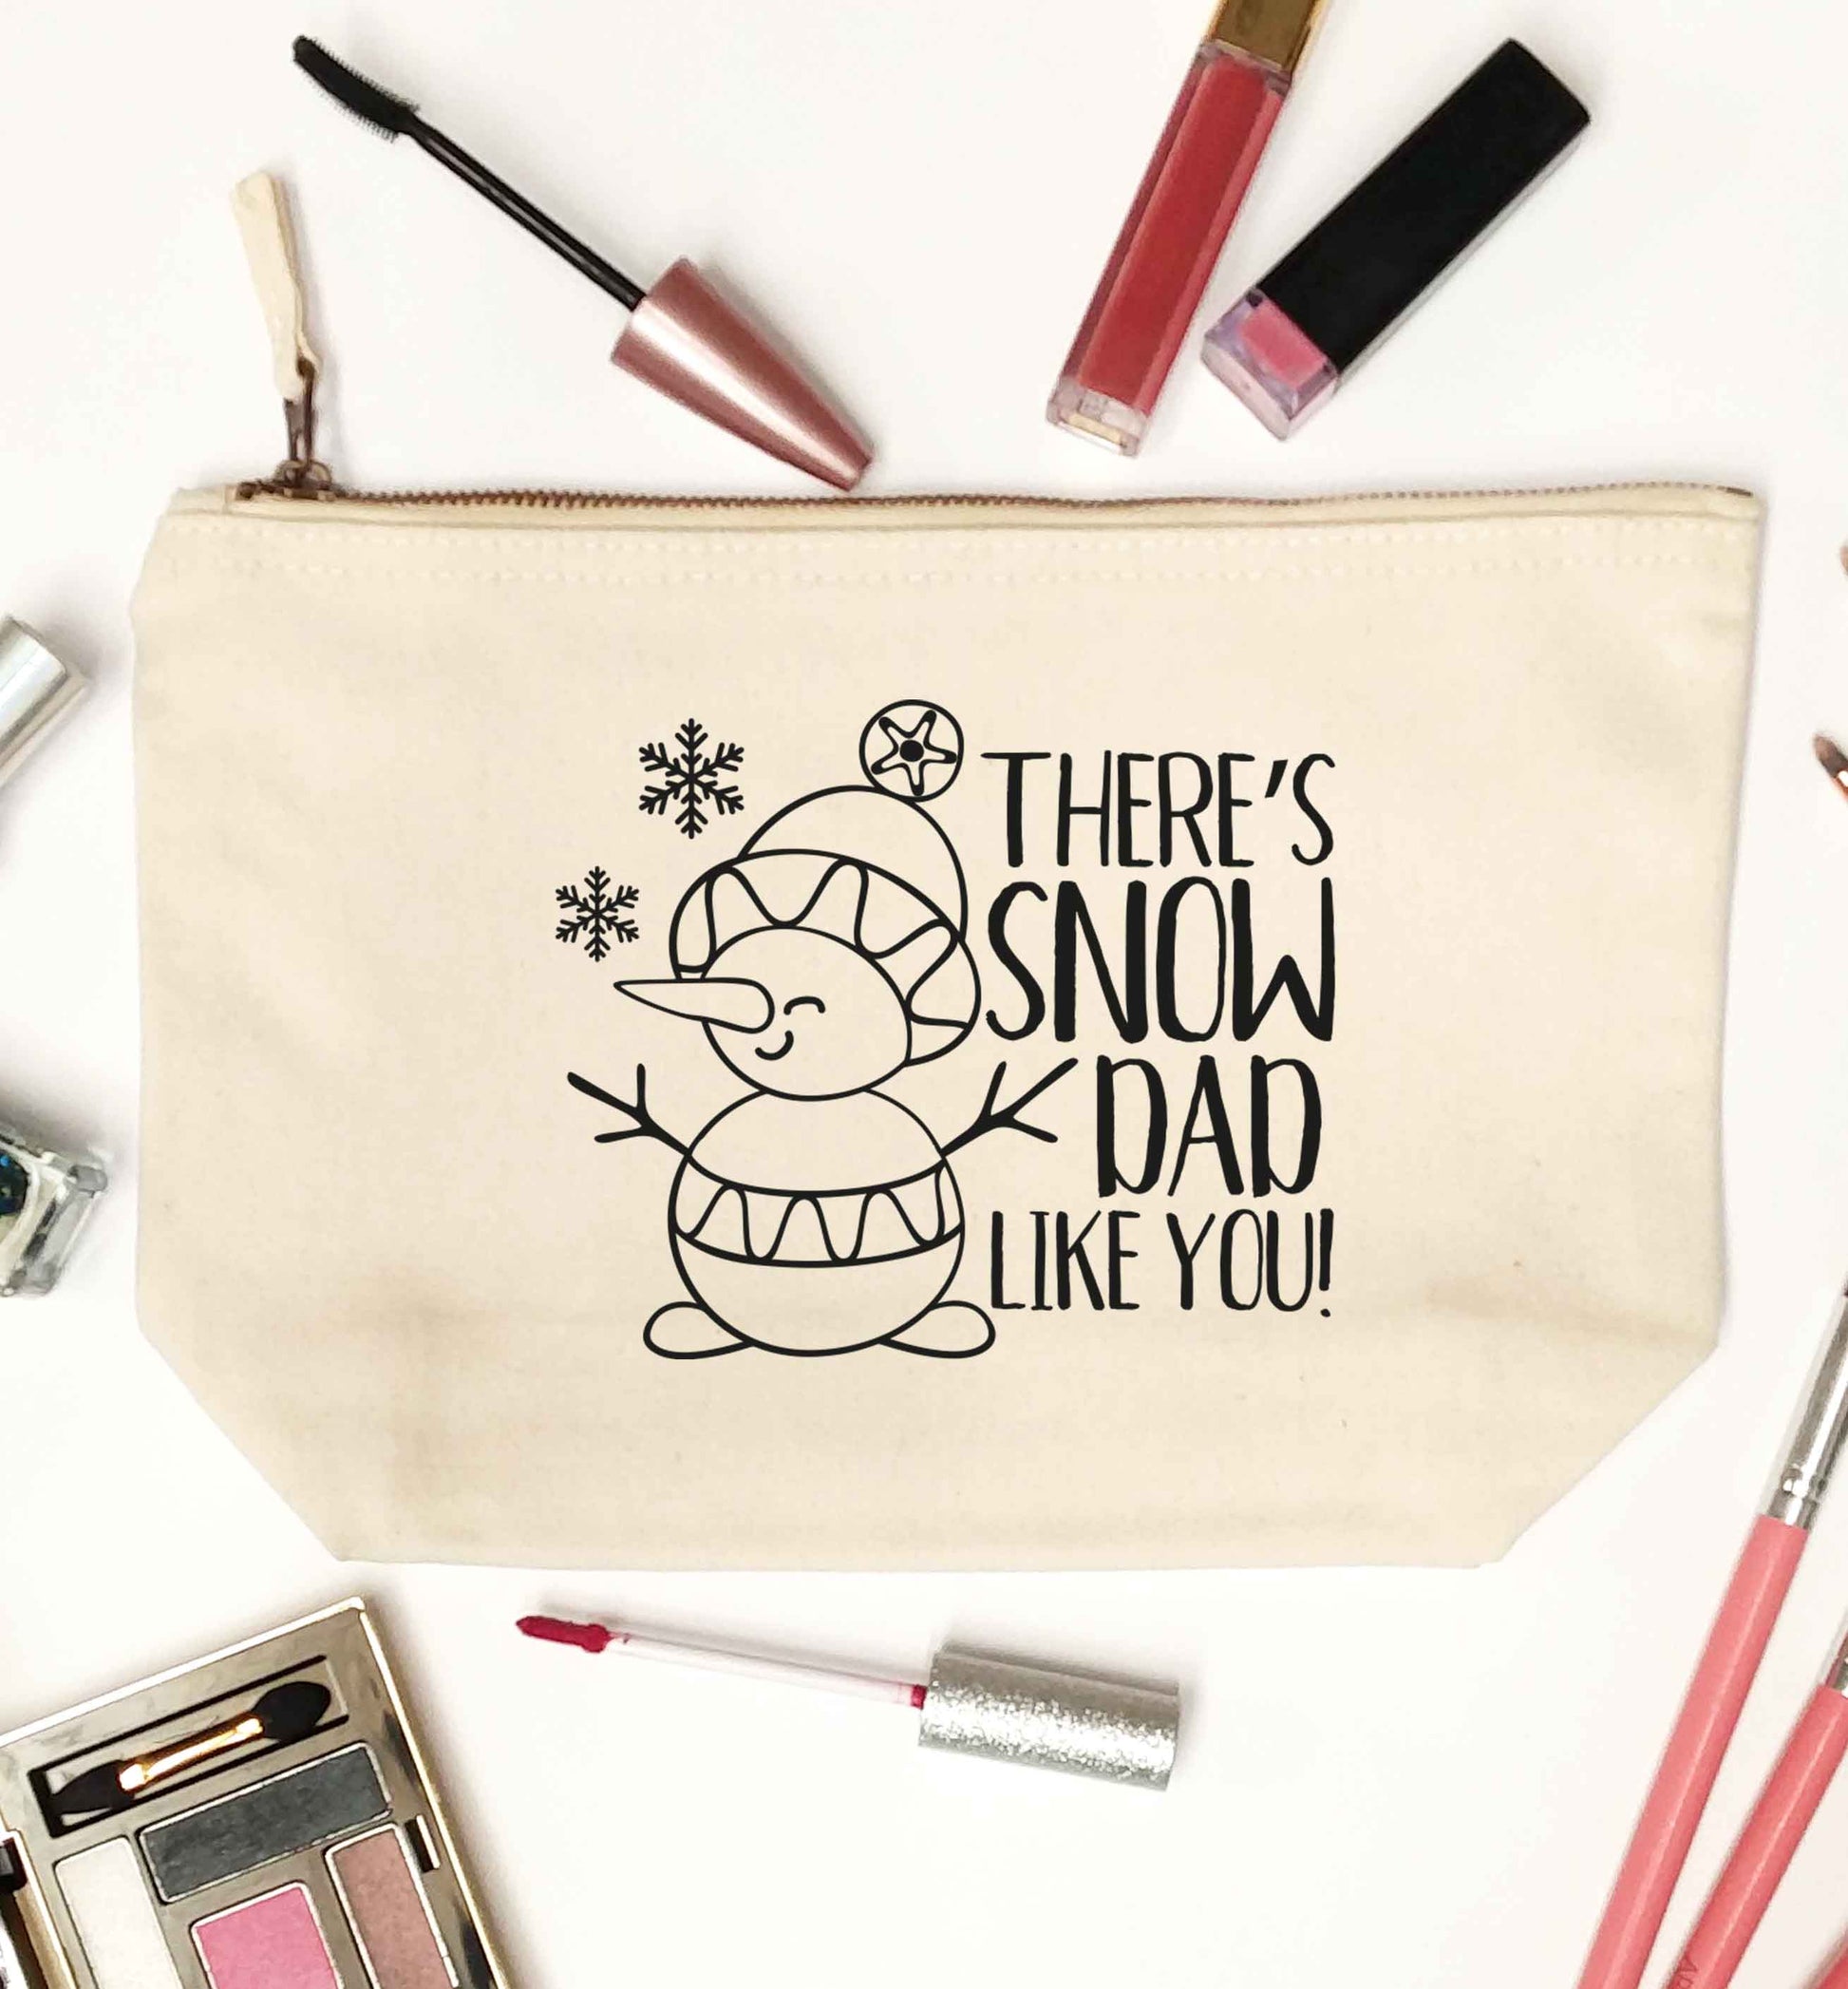 There's snow dad like you natural makeup bag